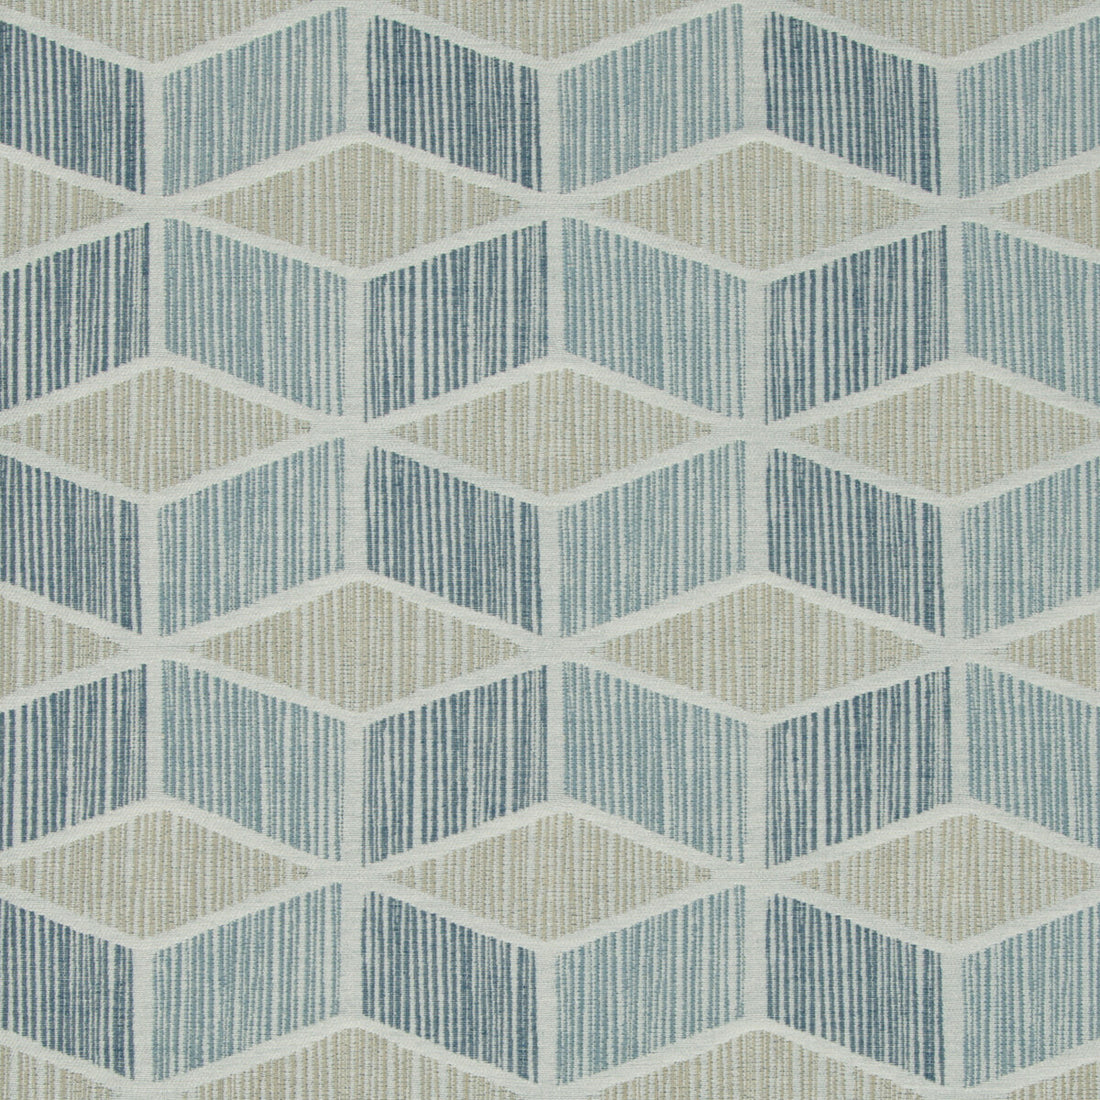 Canard fabric in river color - pattern 34859.511.0 - by Kravet Basics in the Thom Filicia Altitude collection